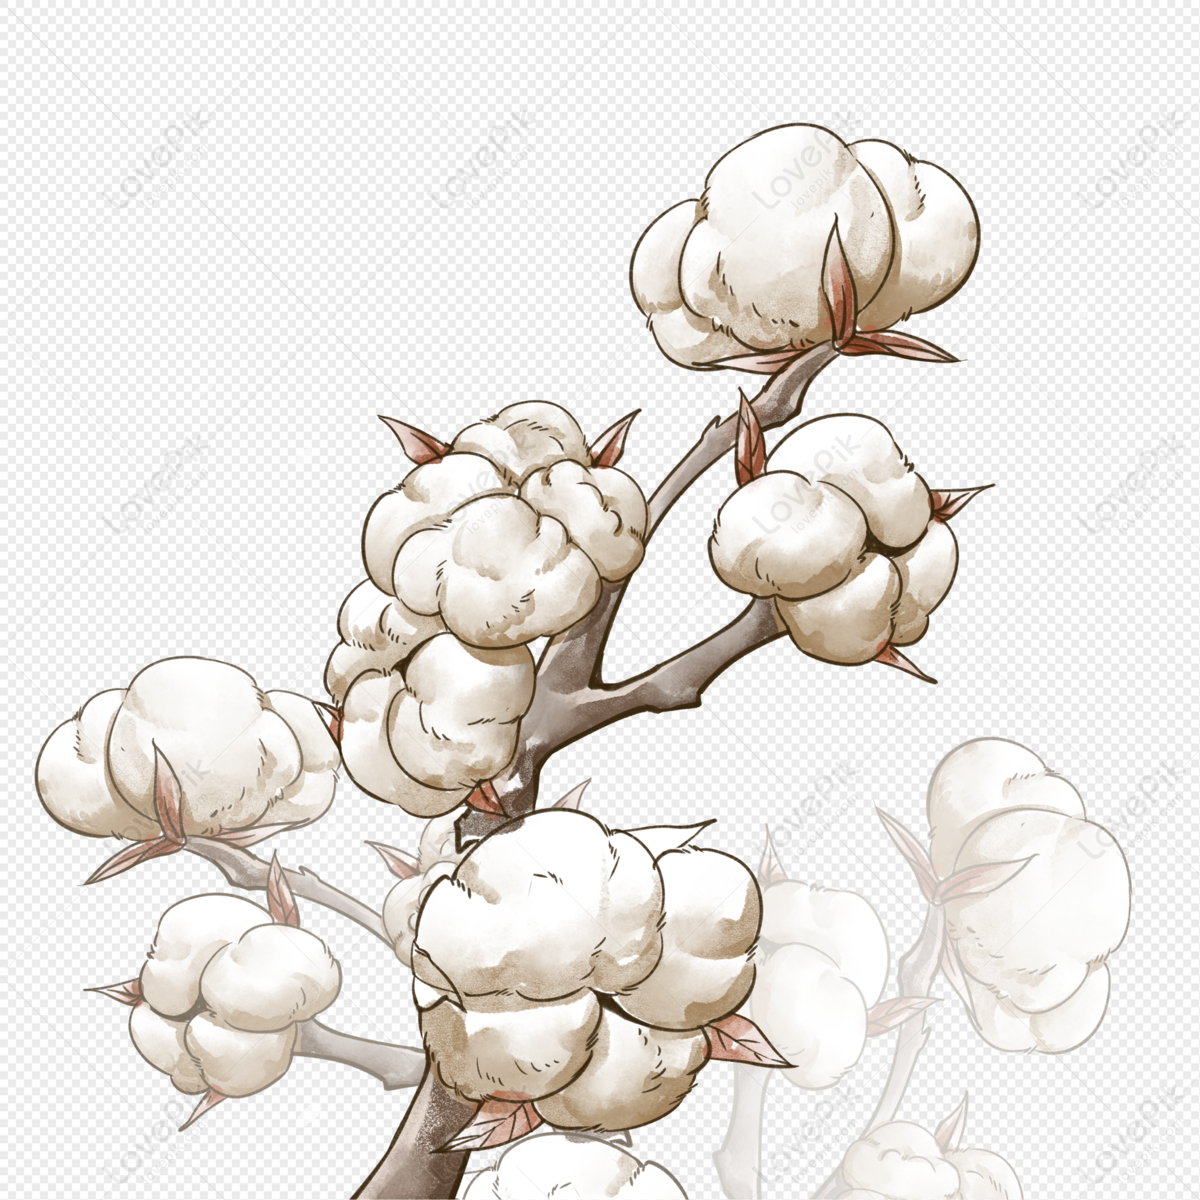 Watercolor Style Cotton Clump PNG Image Free Download And Clipart Image ...